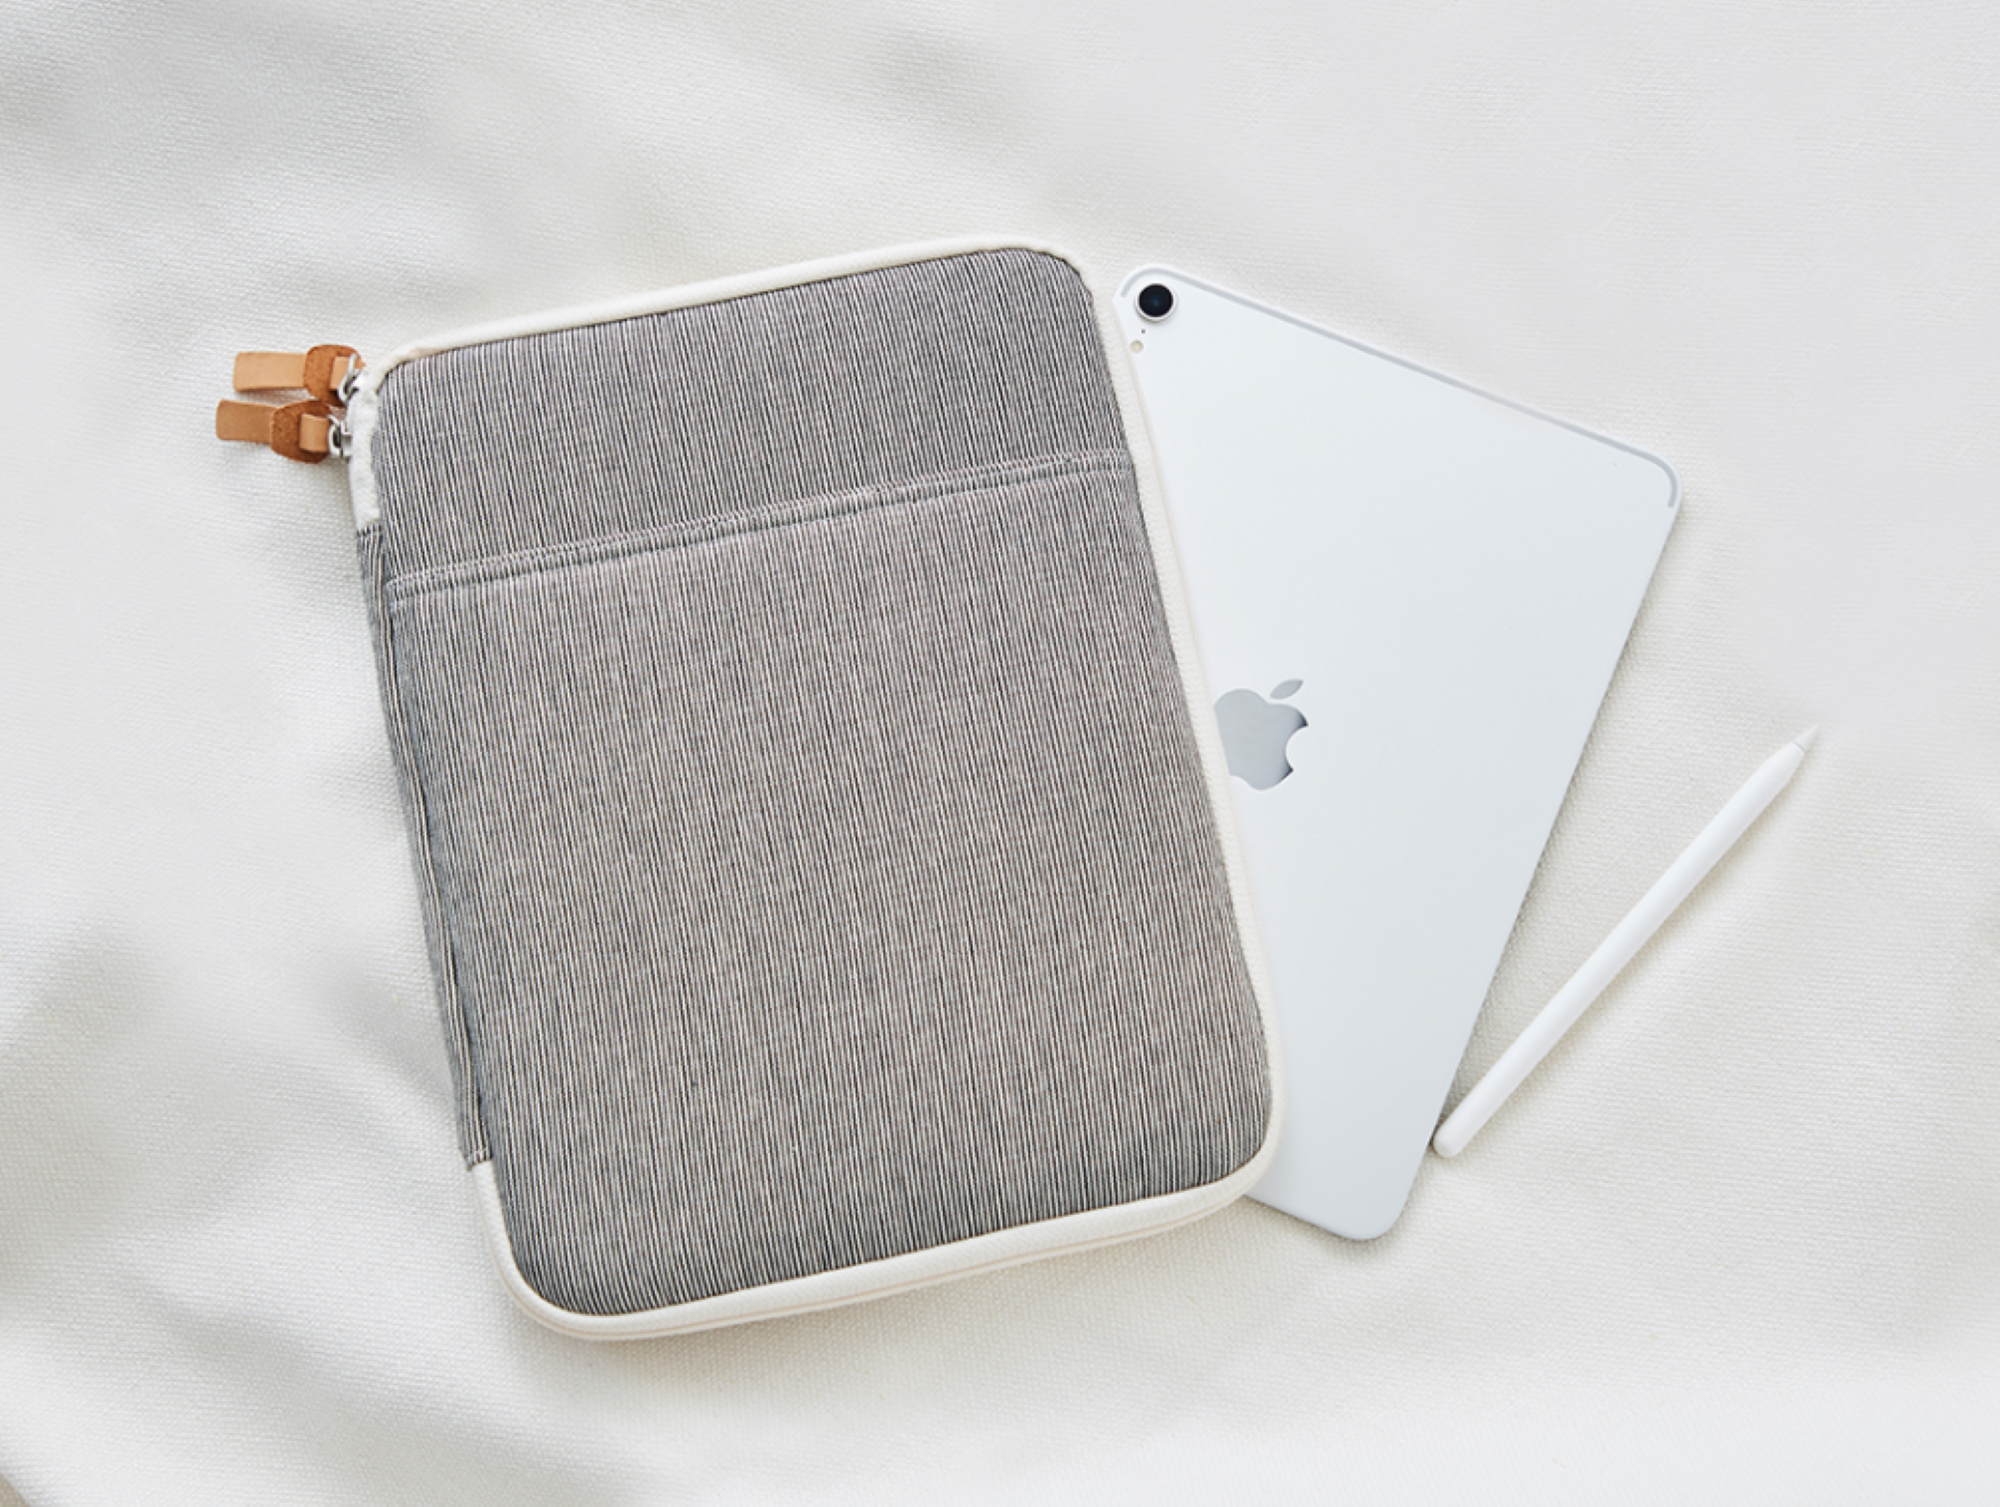 Natural Canvas Laptop Sleeve 11" High quality iPad Pro Case